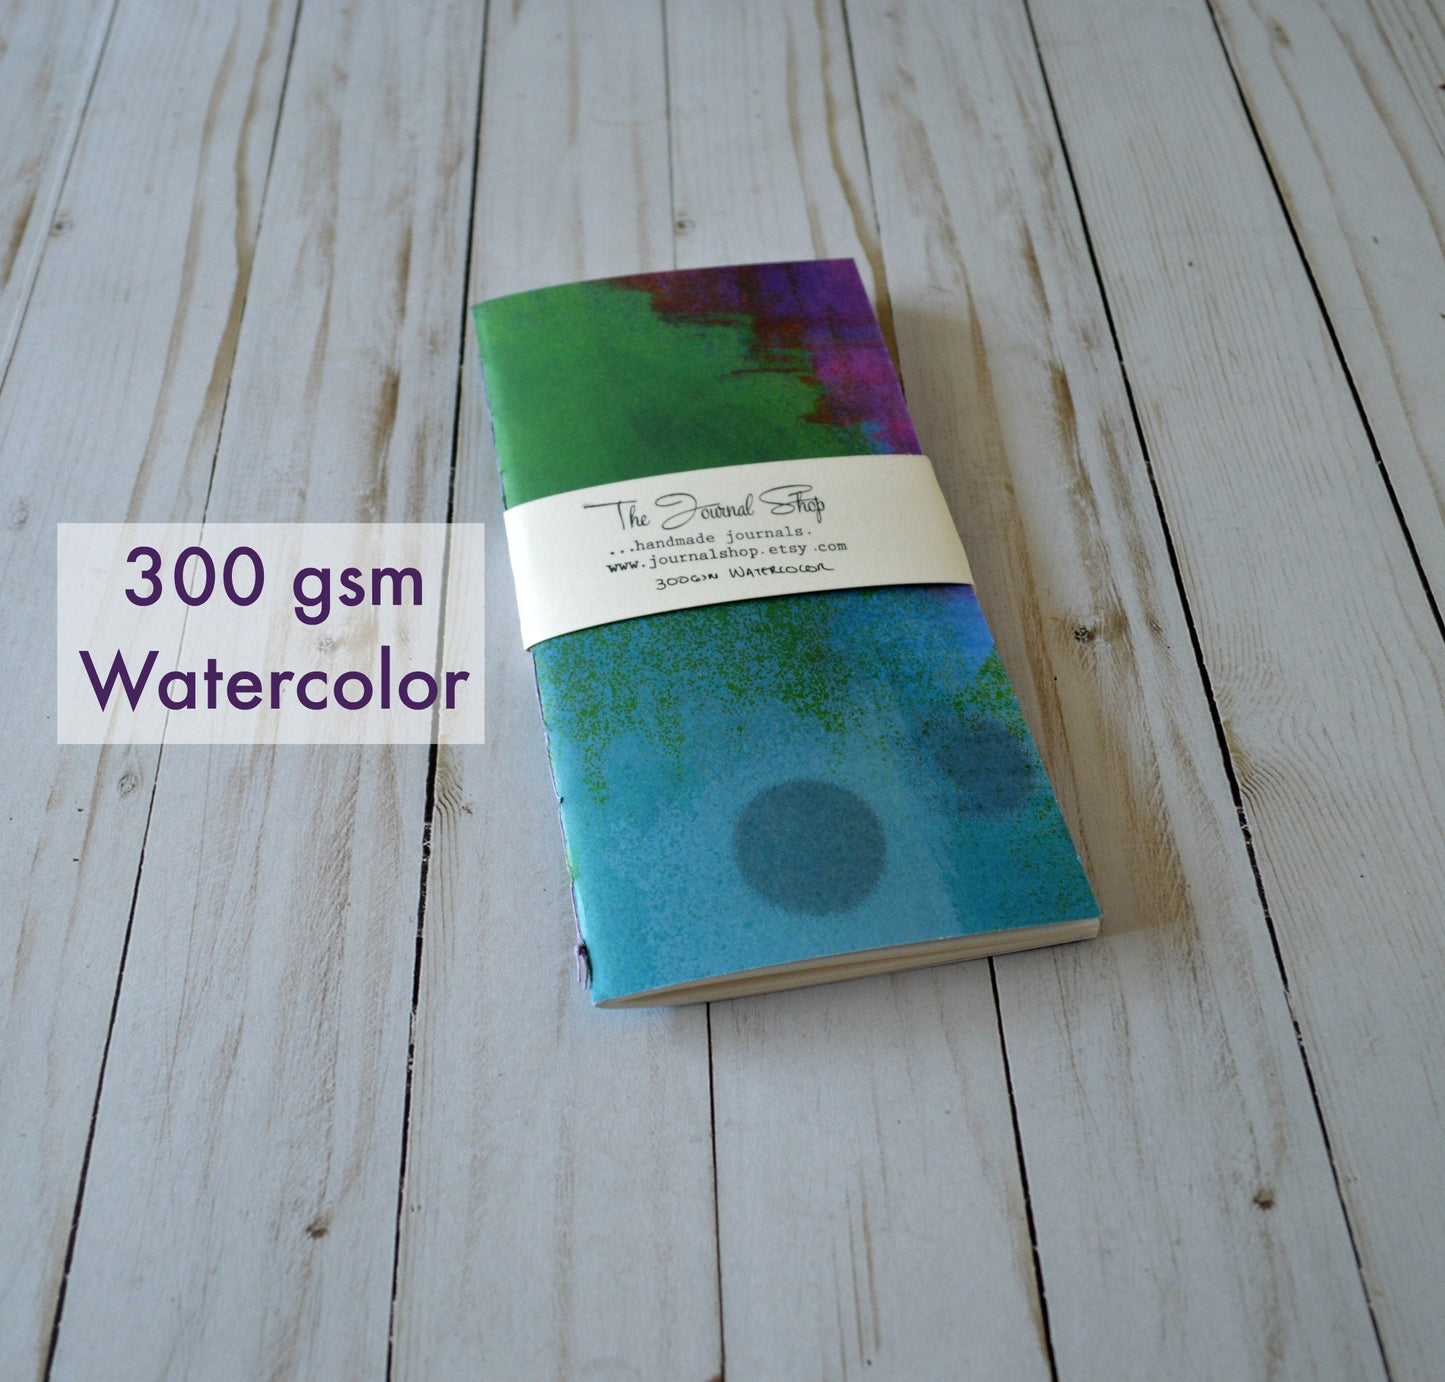 Watercolor Travelers Notebook Refill,  Artist drawing sketchbook, Pocket Journal book insert with watercolour paper, Gift for creative